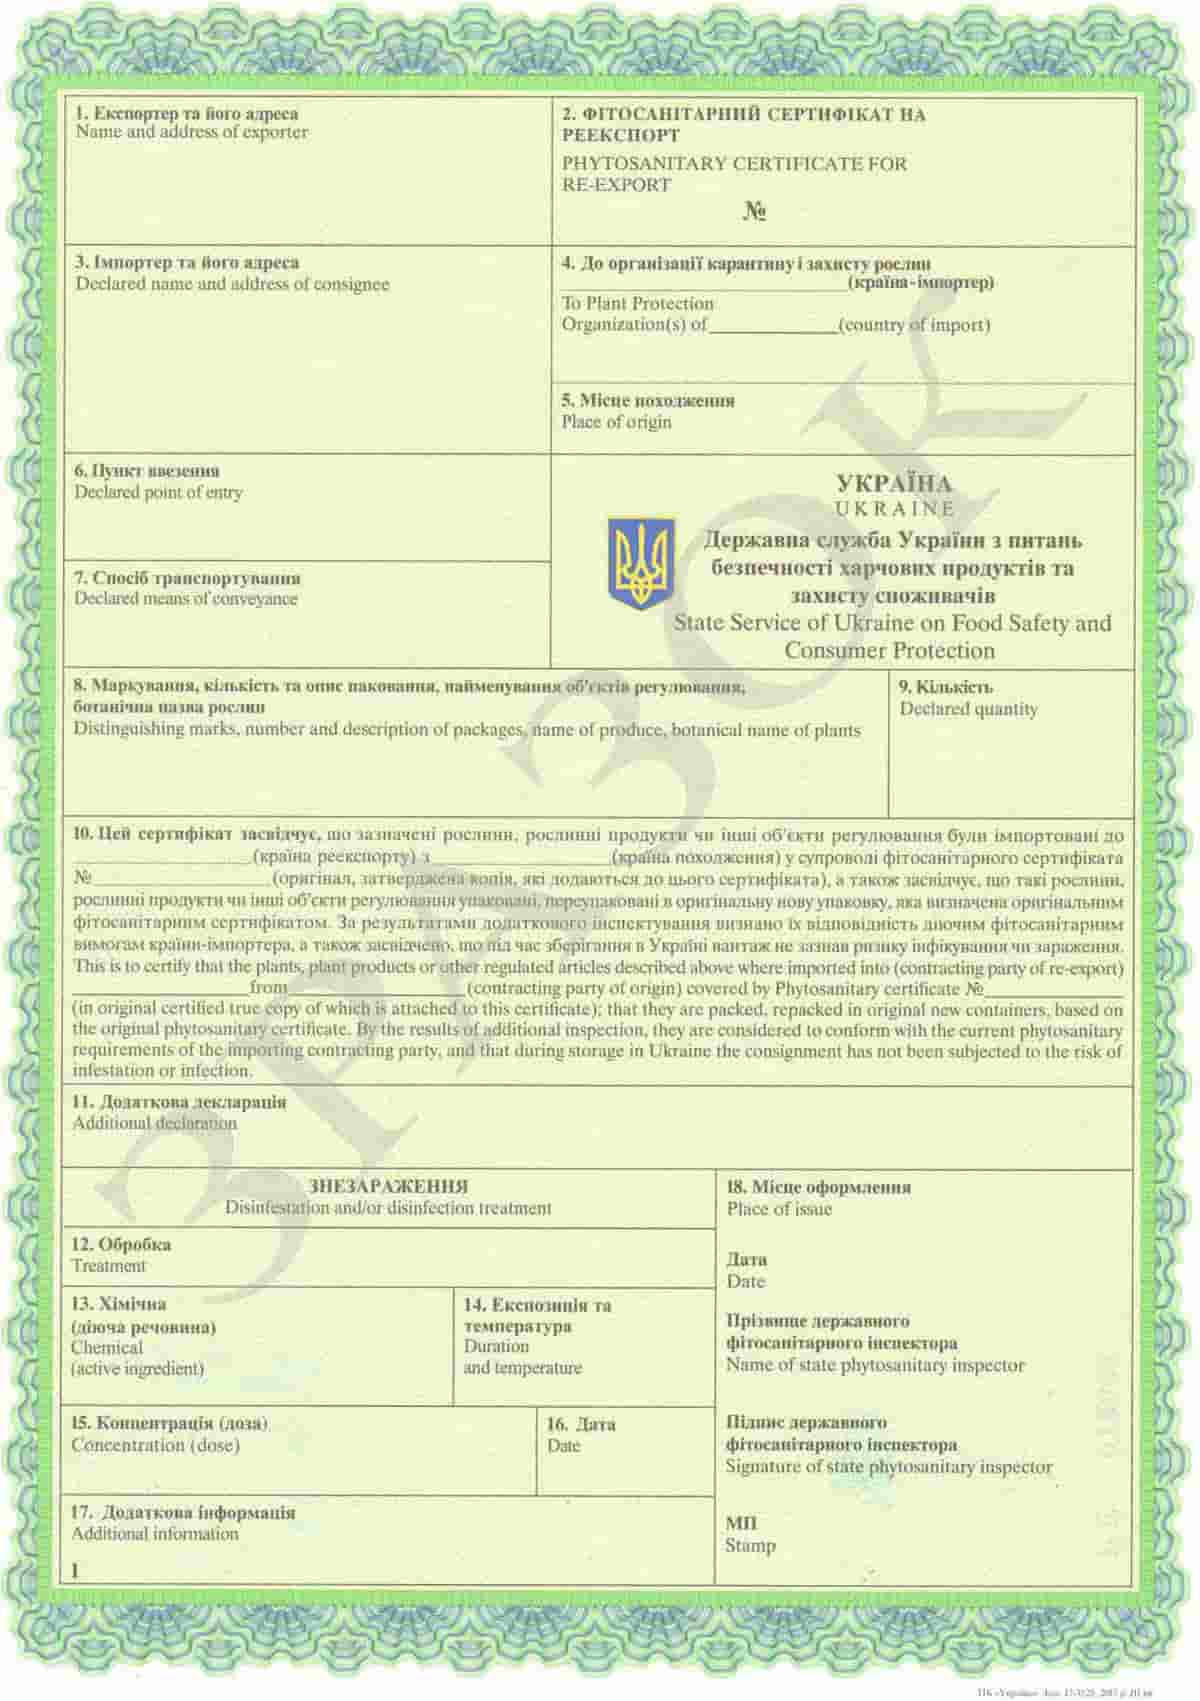 Sample phytosanitary certificate - DiFreight